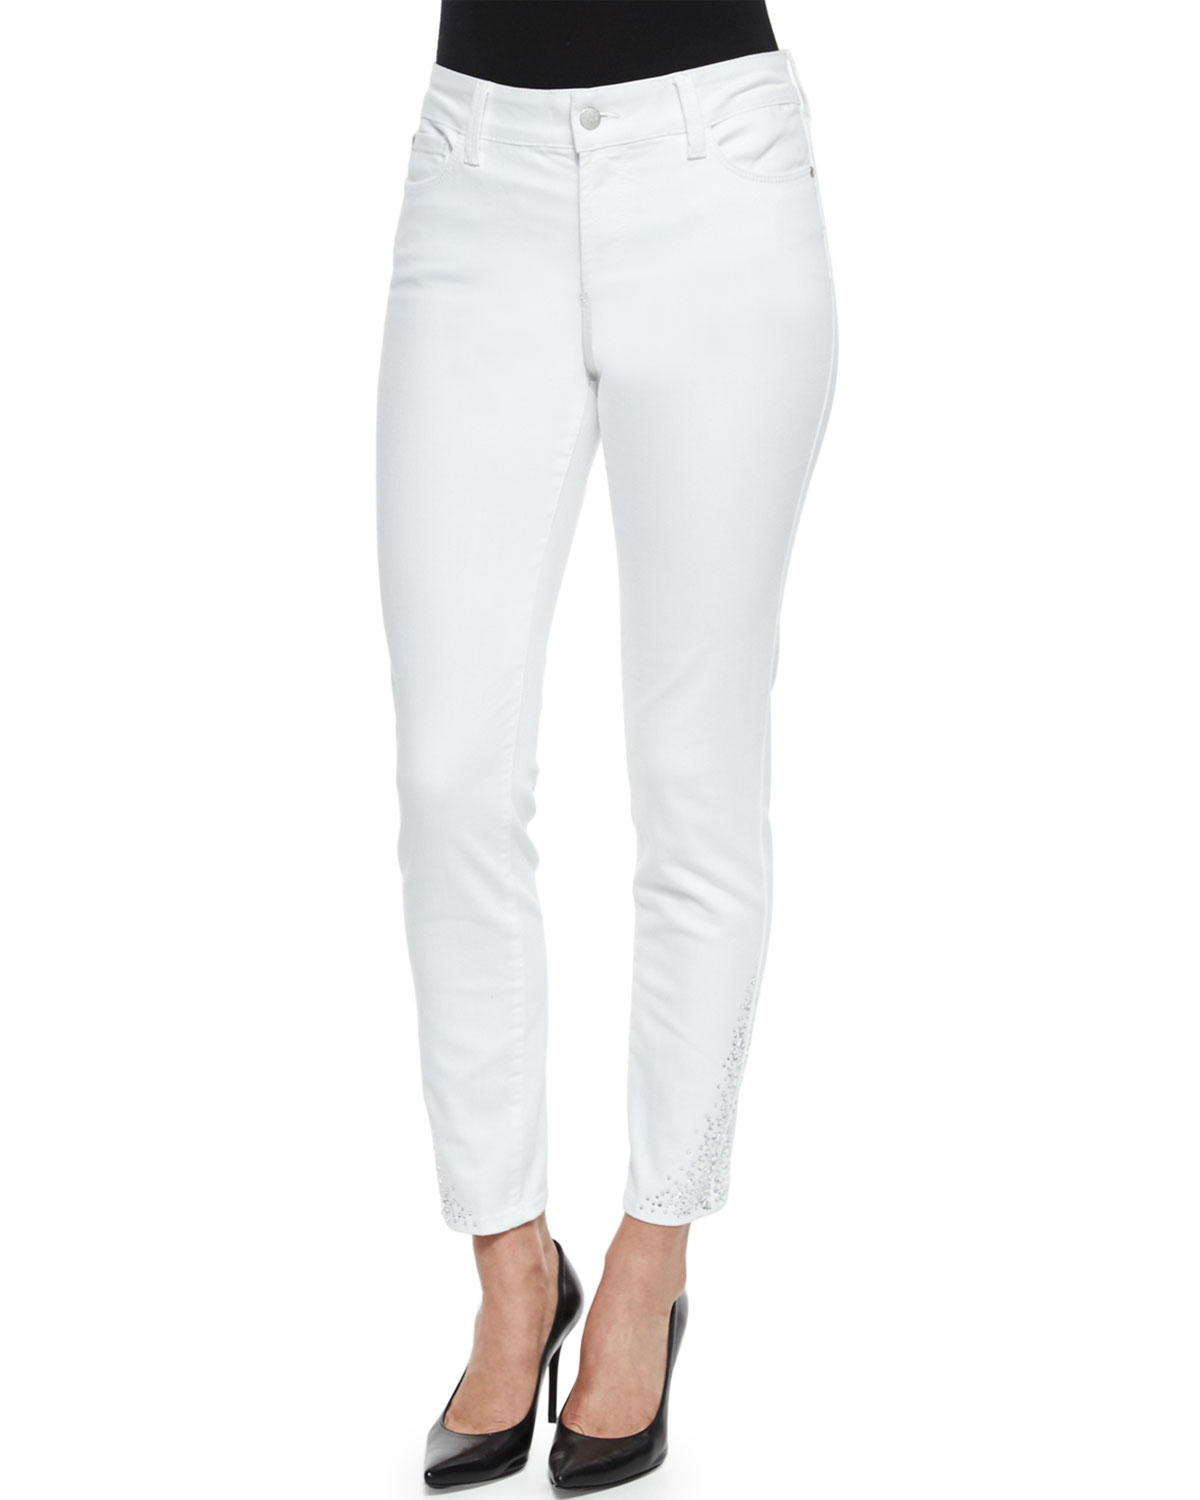 Lyst - Nydj Amira Narrow Ankle Jeans in White